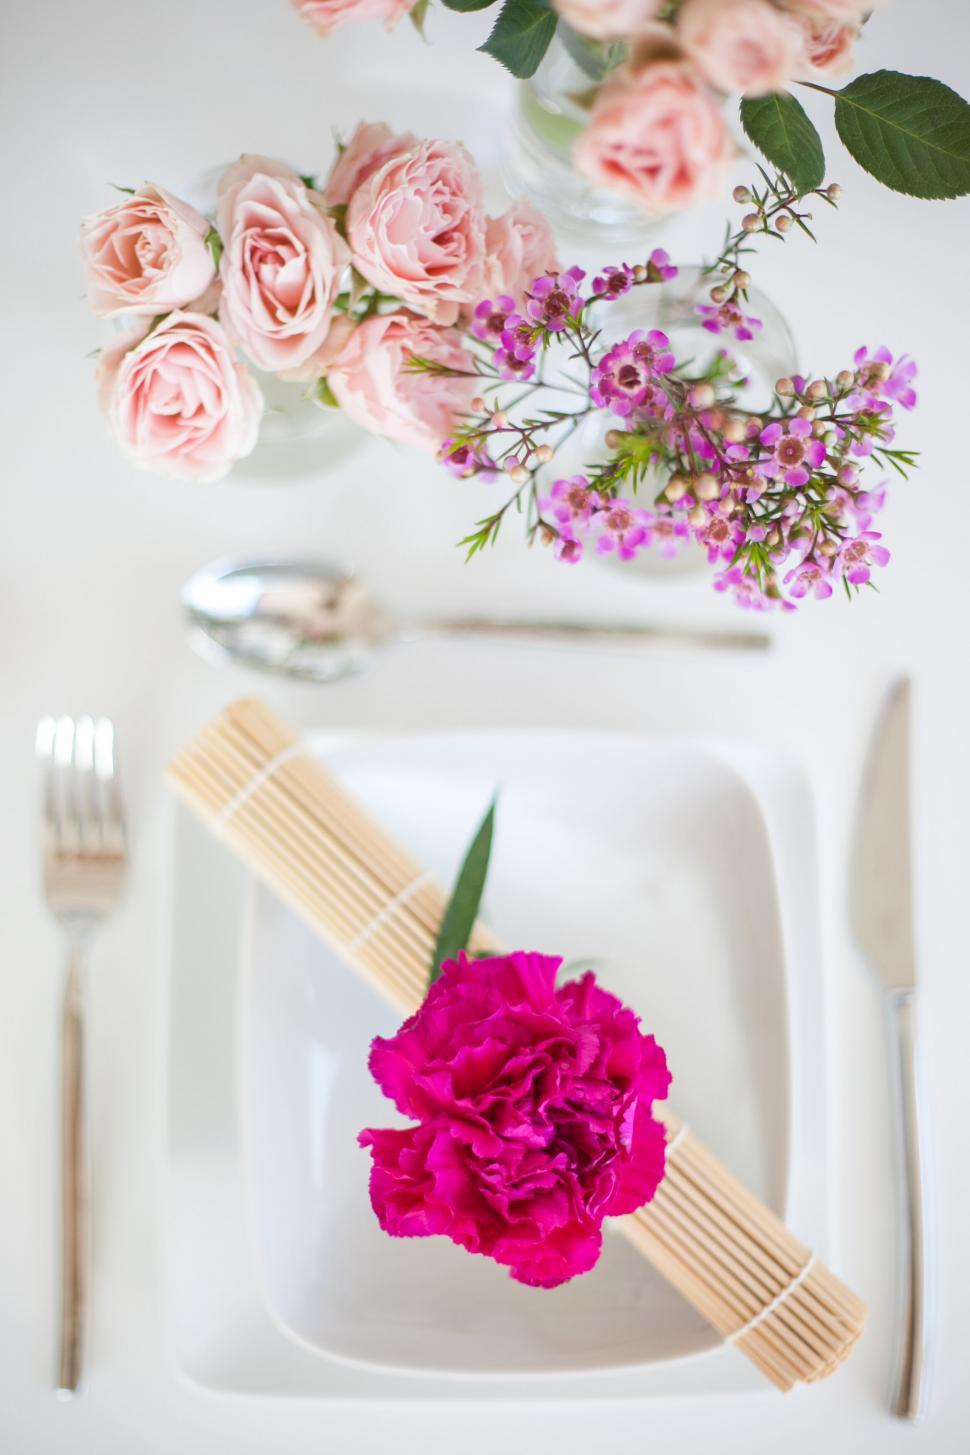 Free Image of Table setting with flowers and utensils 